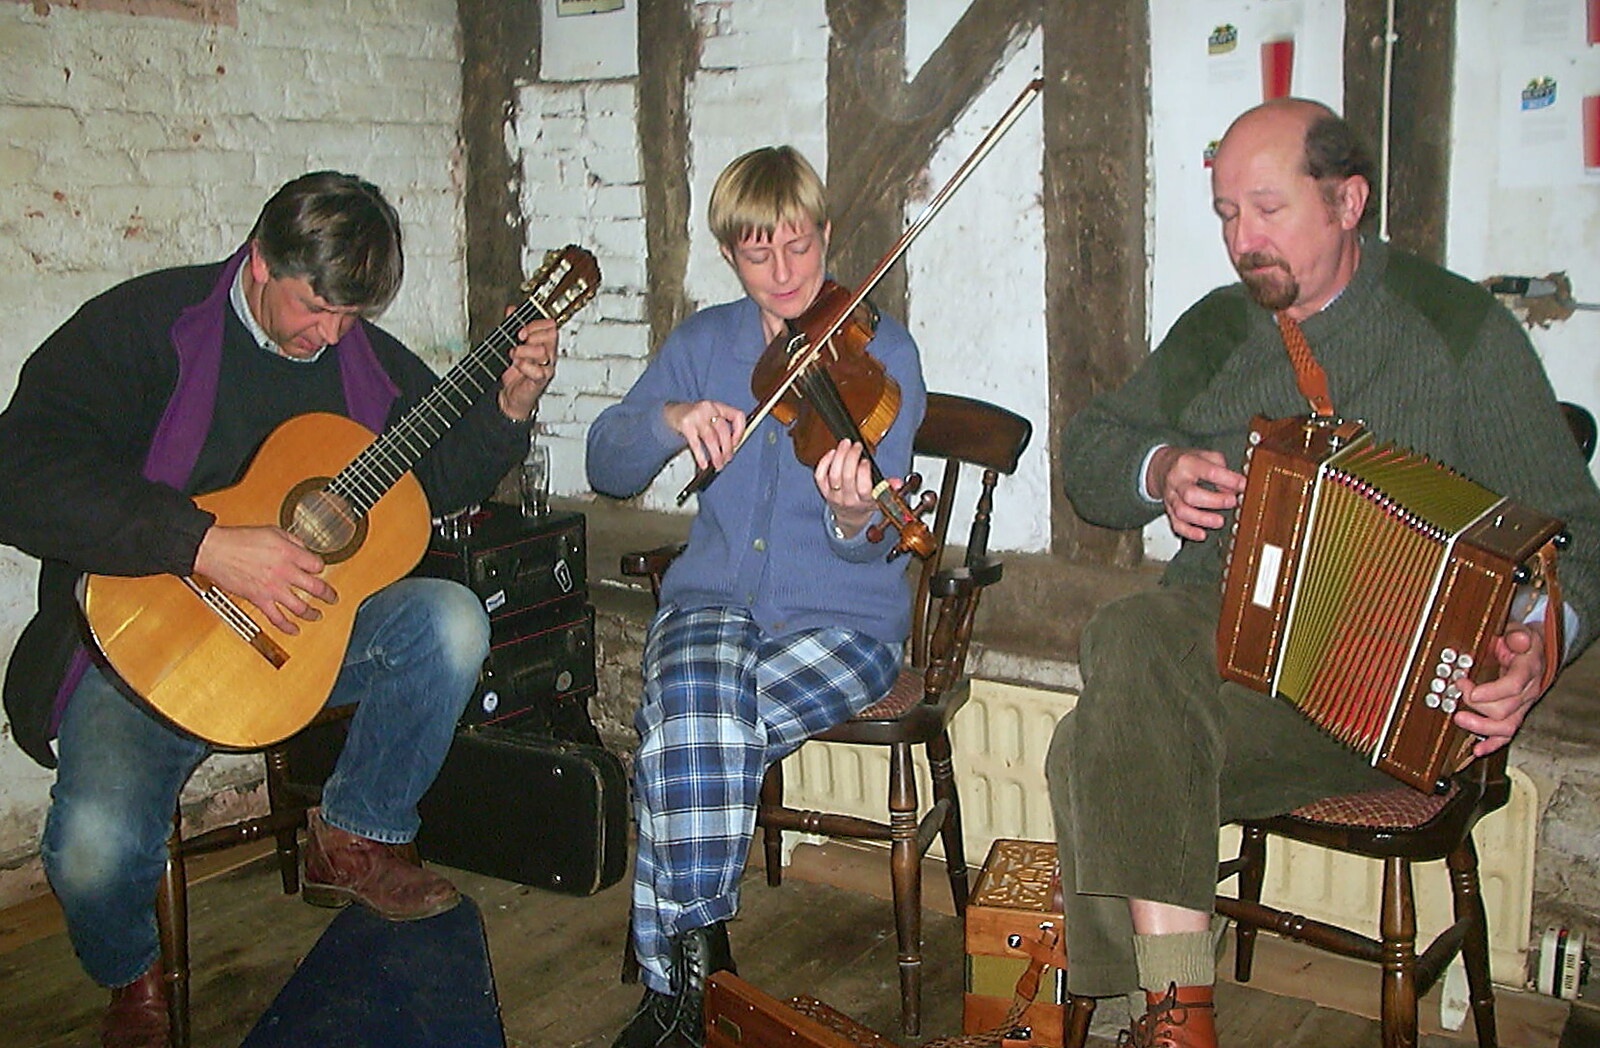 The band from The Hoxne Beer Festival, Suffolk - 20th May 2002